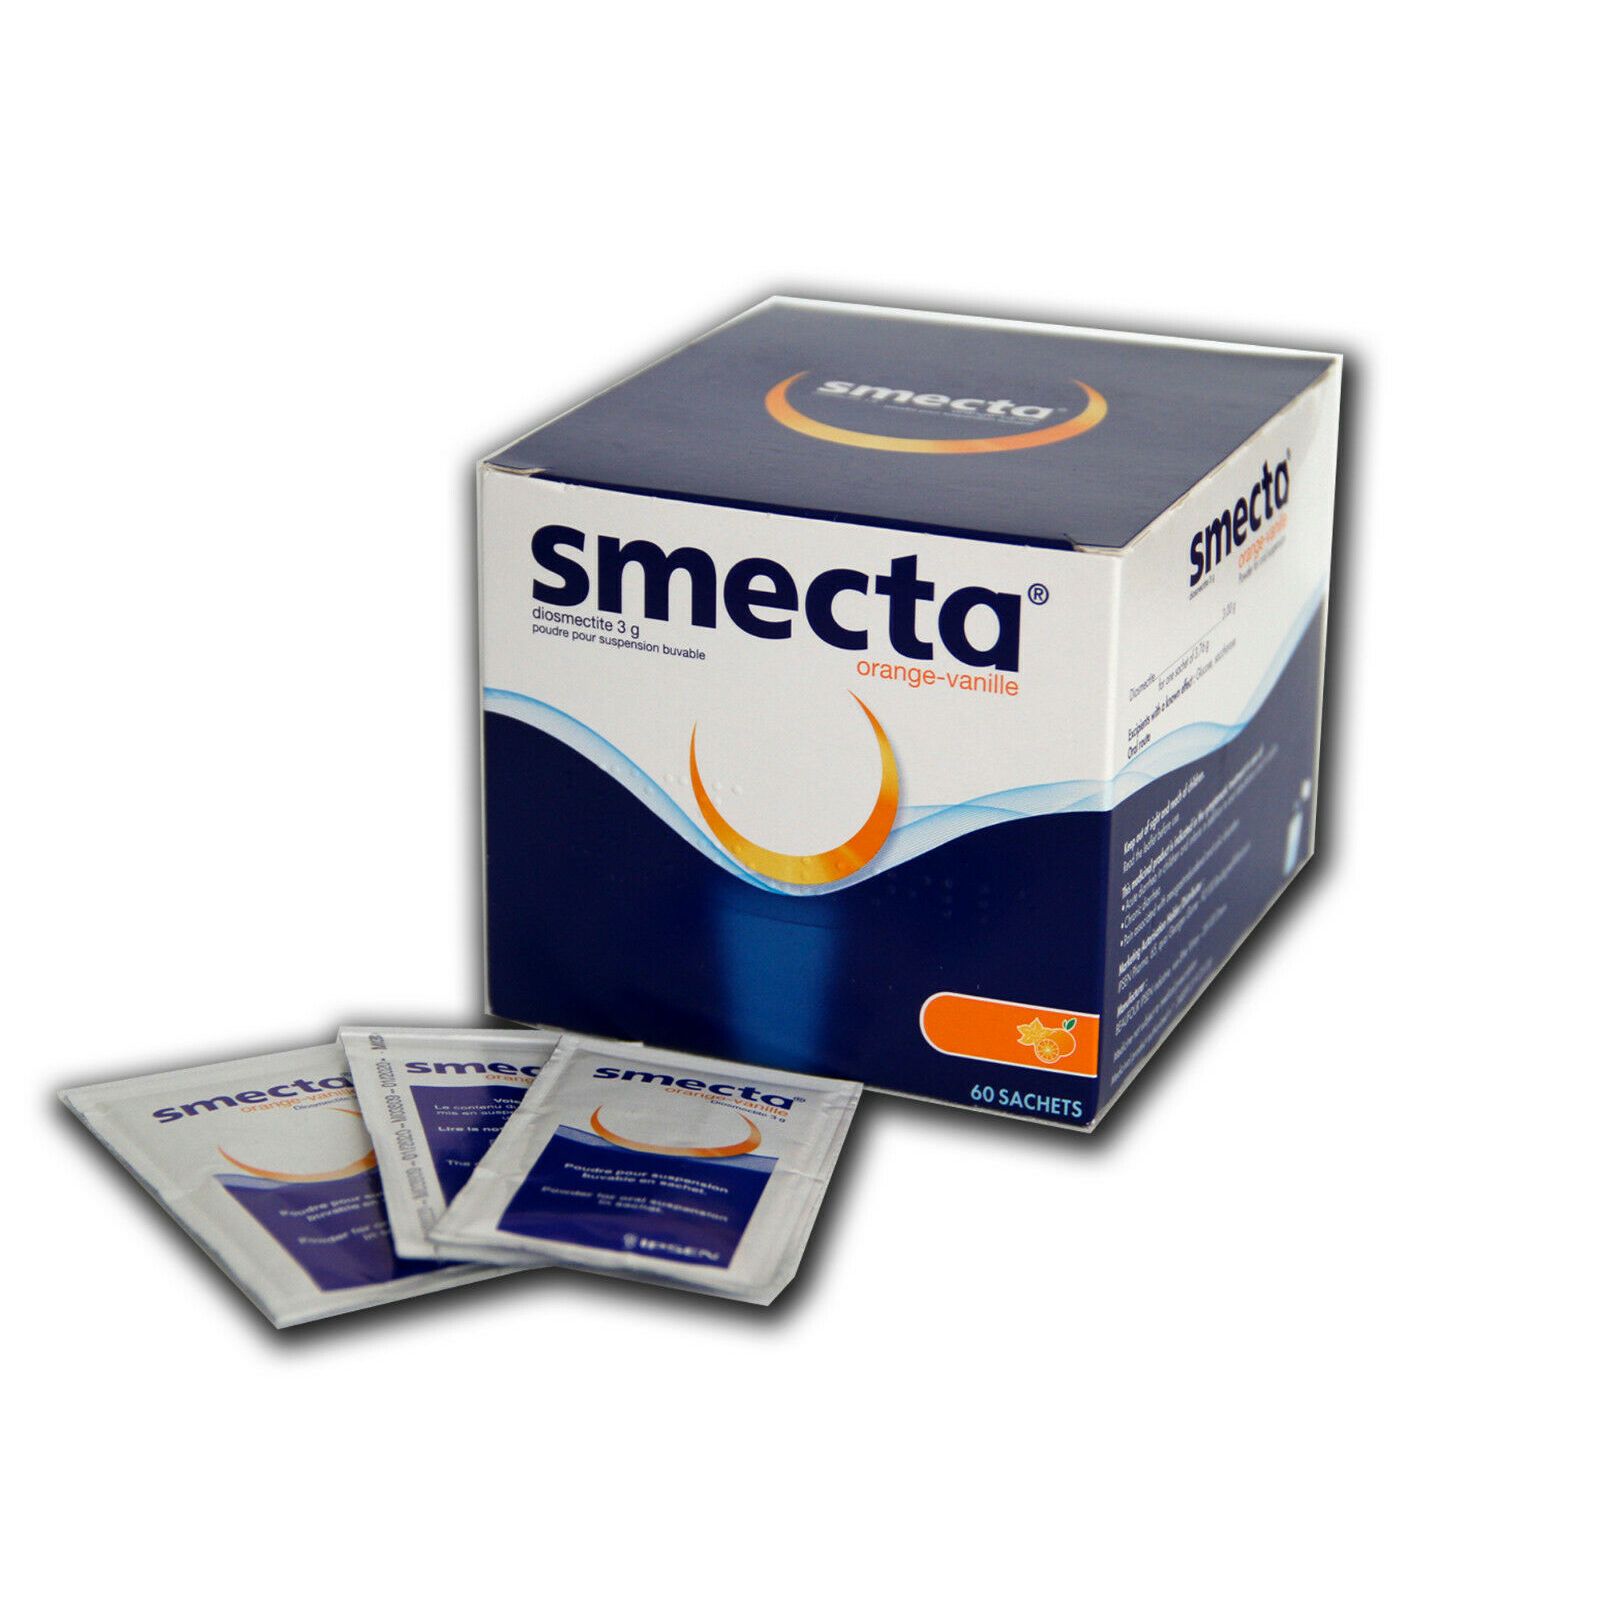 Buy Smecta 60 sachets online in the US pharmacy.